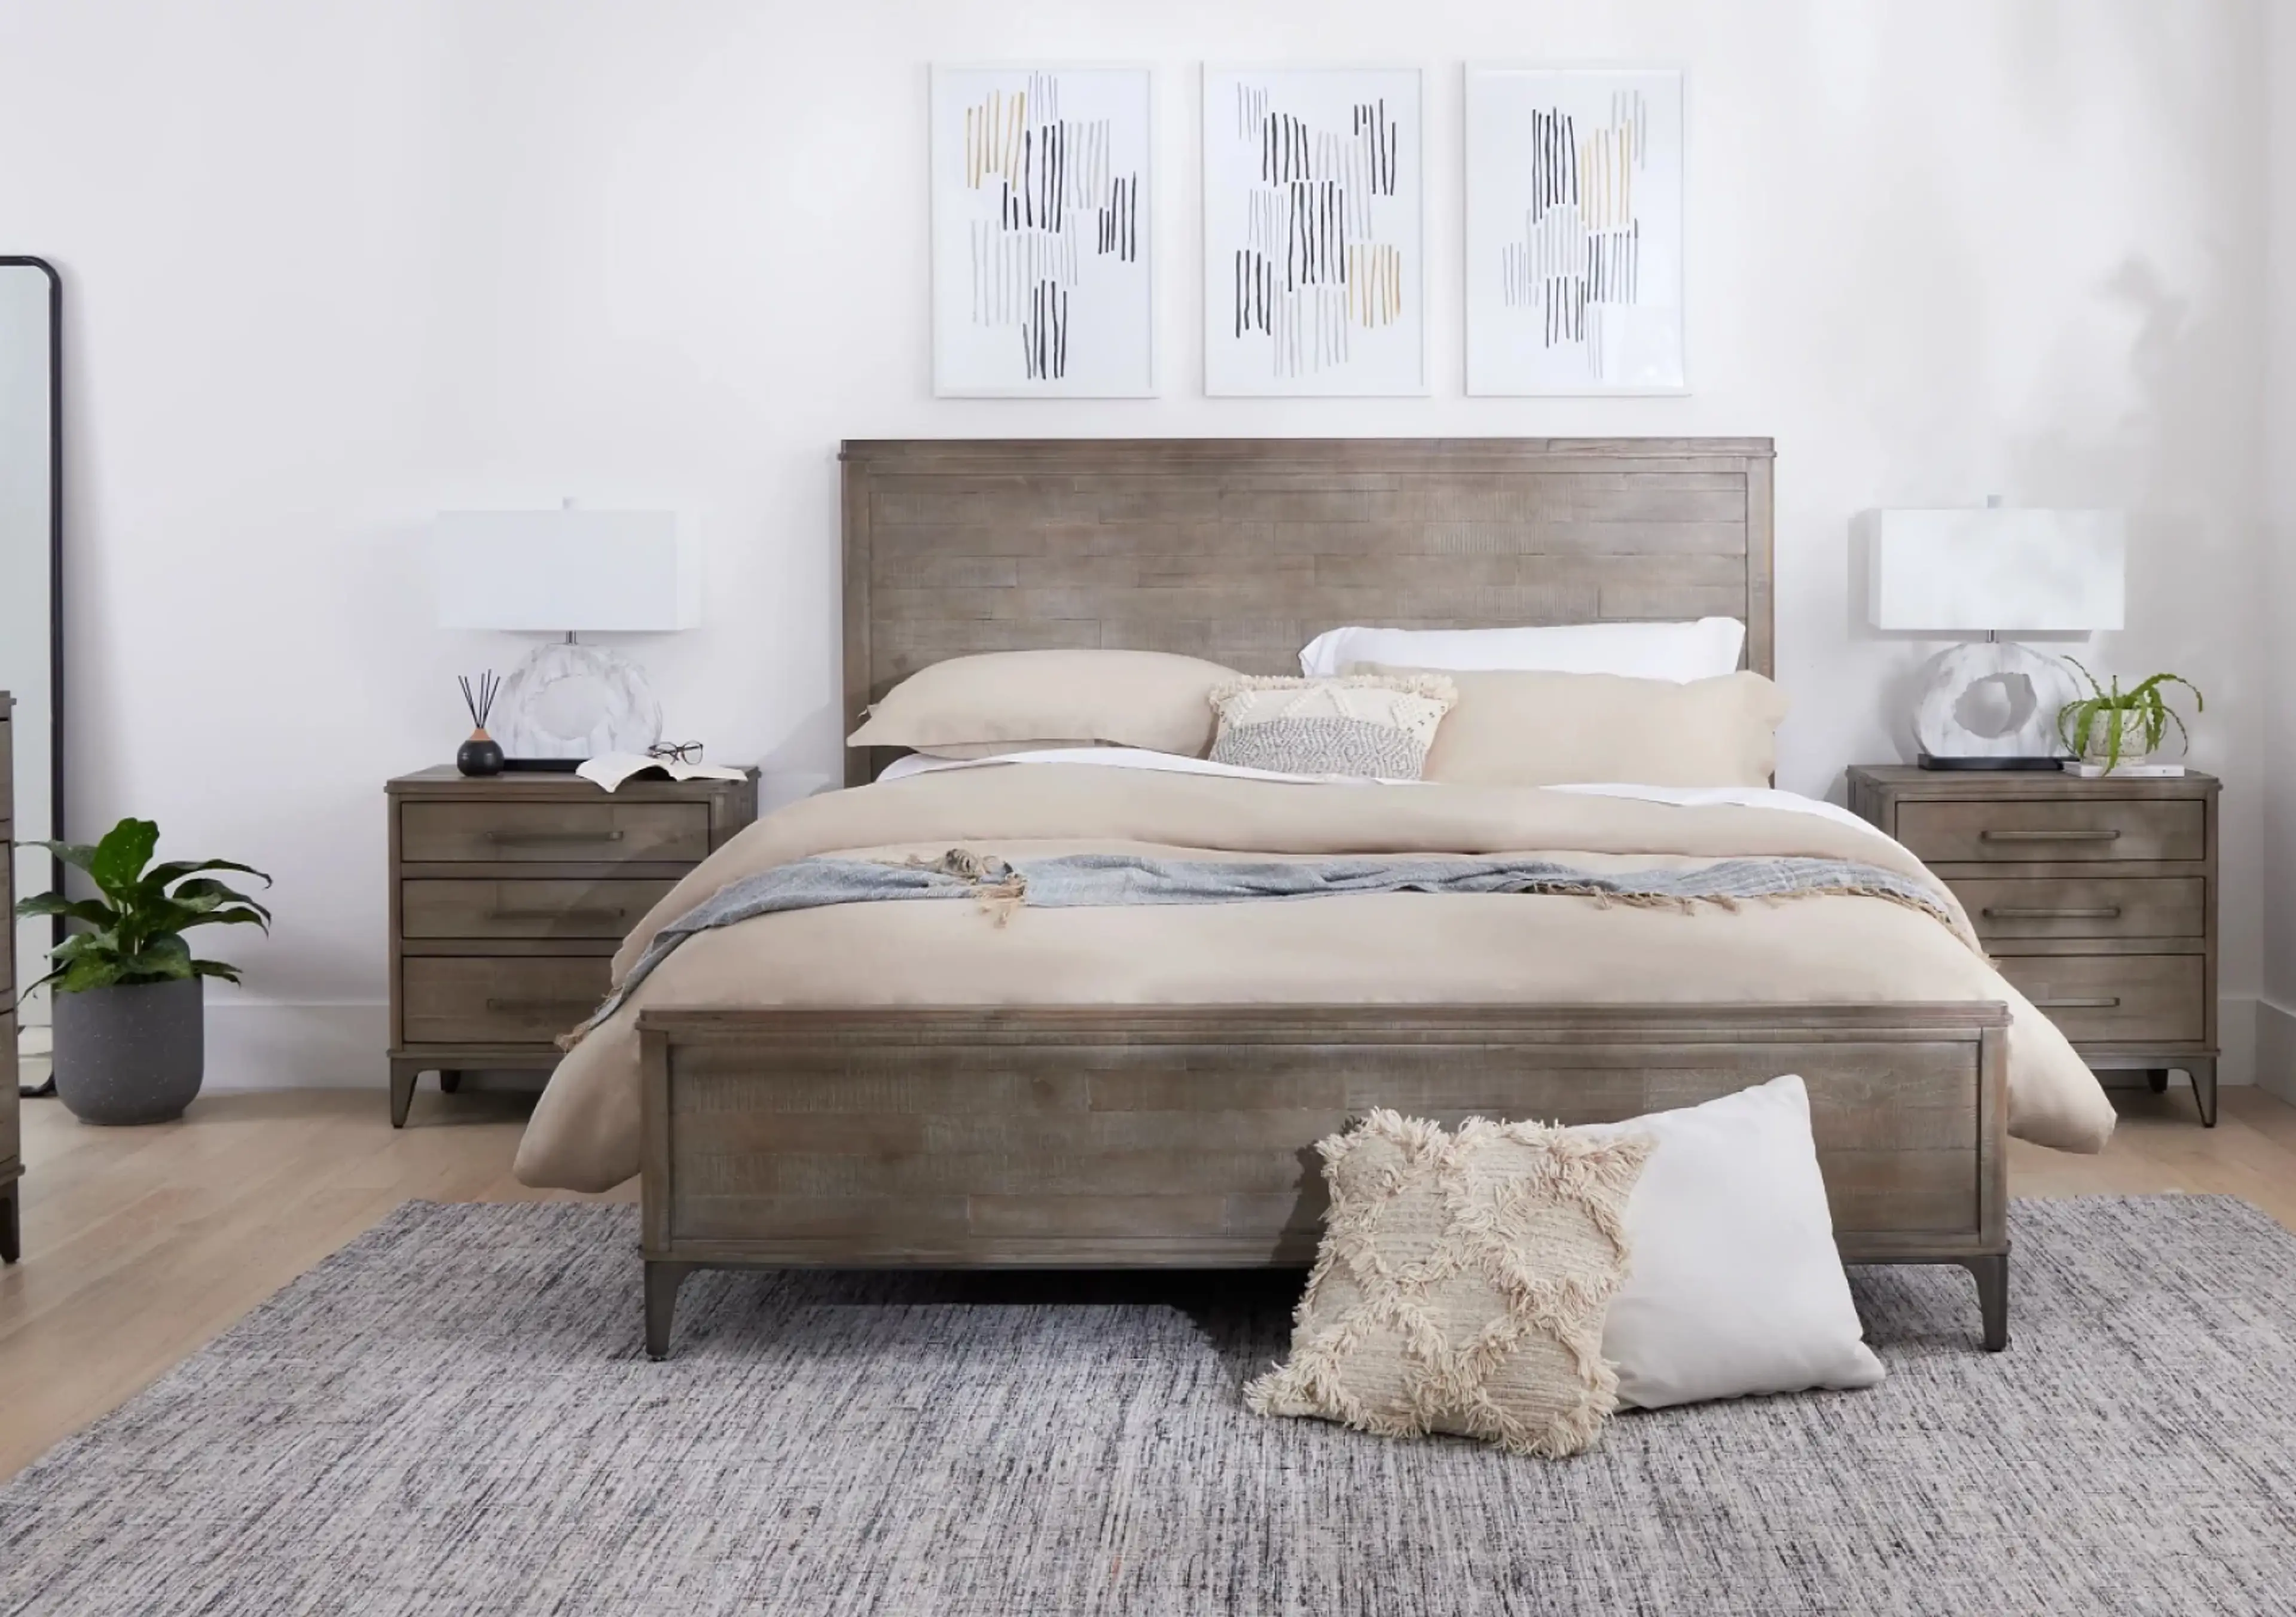 The Advantages of Investing in a Bedroom Set